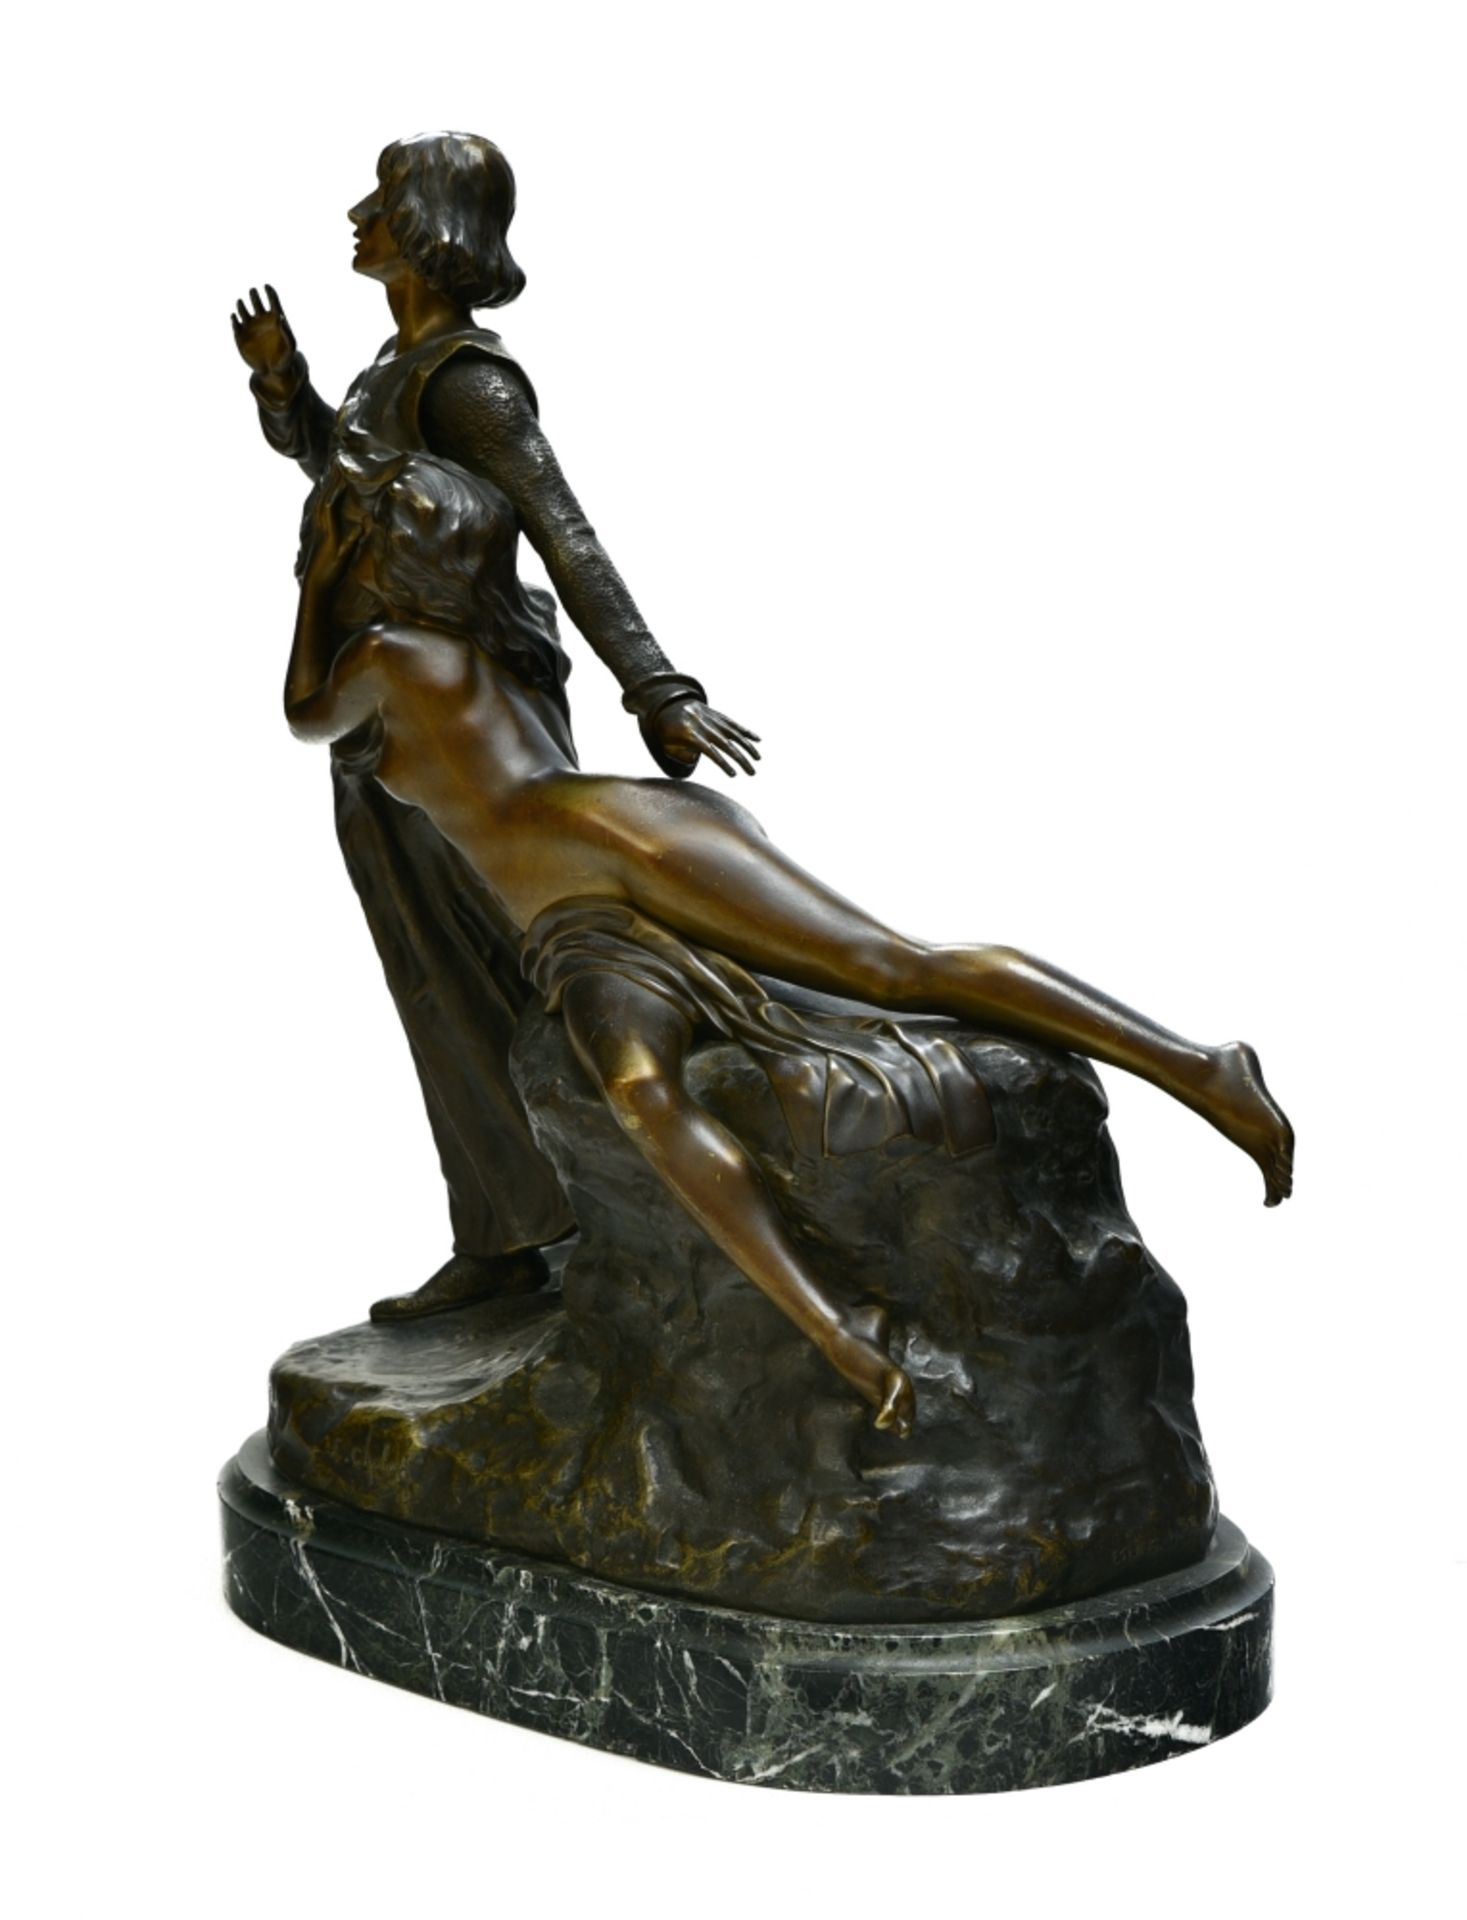 Louis CHALON (1866-1940) TannhŠuser bronze sculpture with shaded brown patina, sea green marble - Image 3 of 5